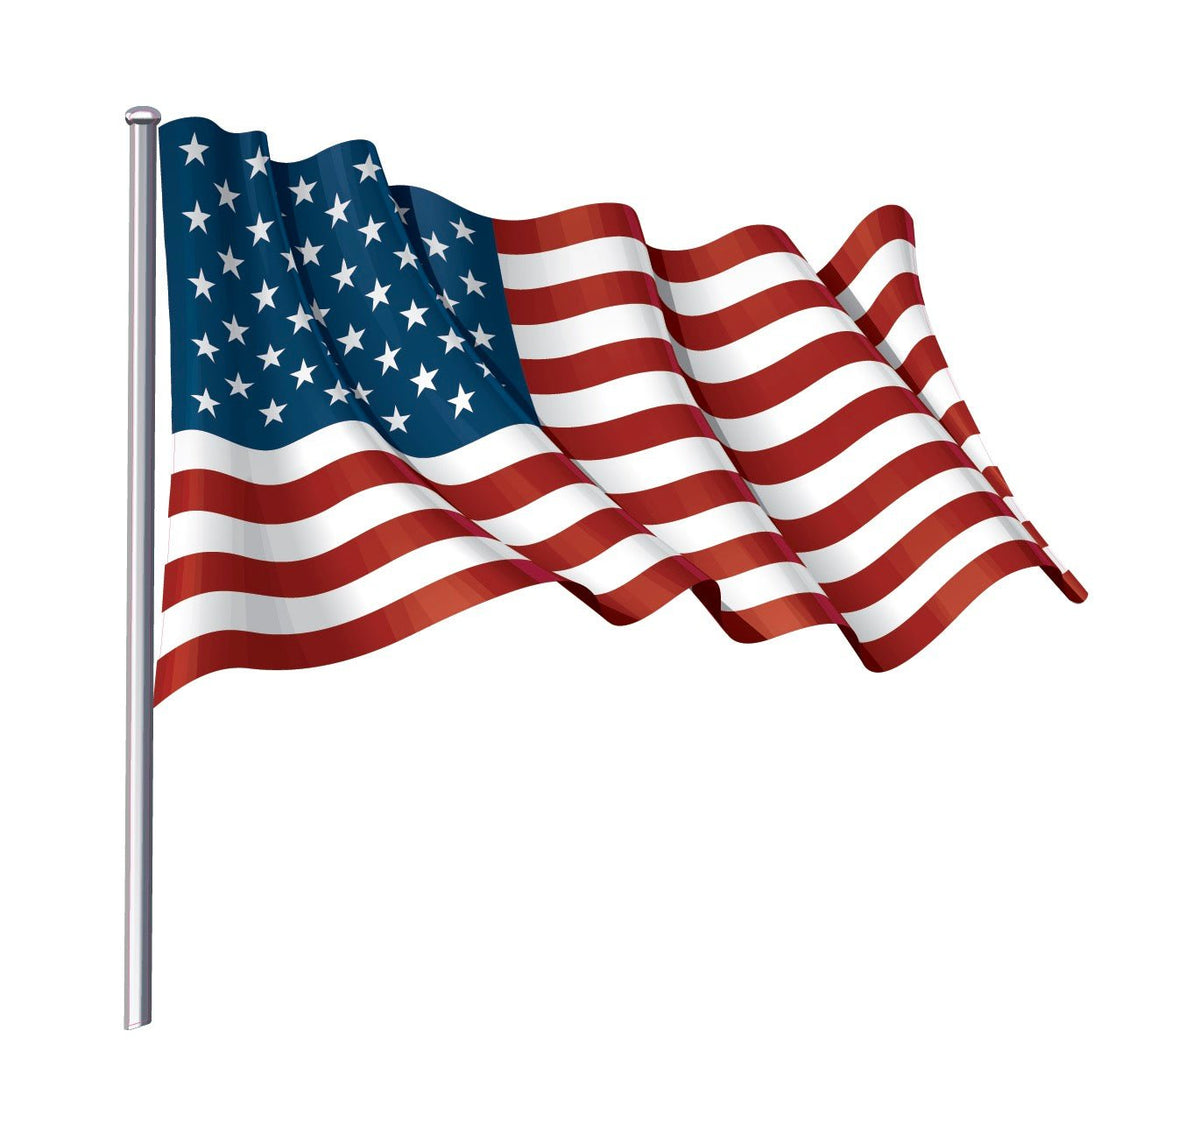 American Flag Decal waving on a flagpole, featuring the traditional design with stars and stripes in red, white, and blue colors for Flag Day by Cover-Alls.